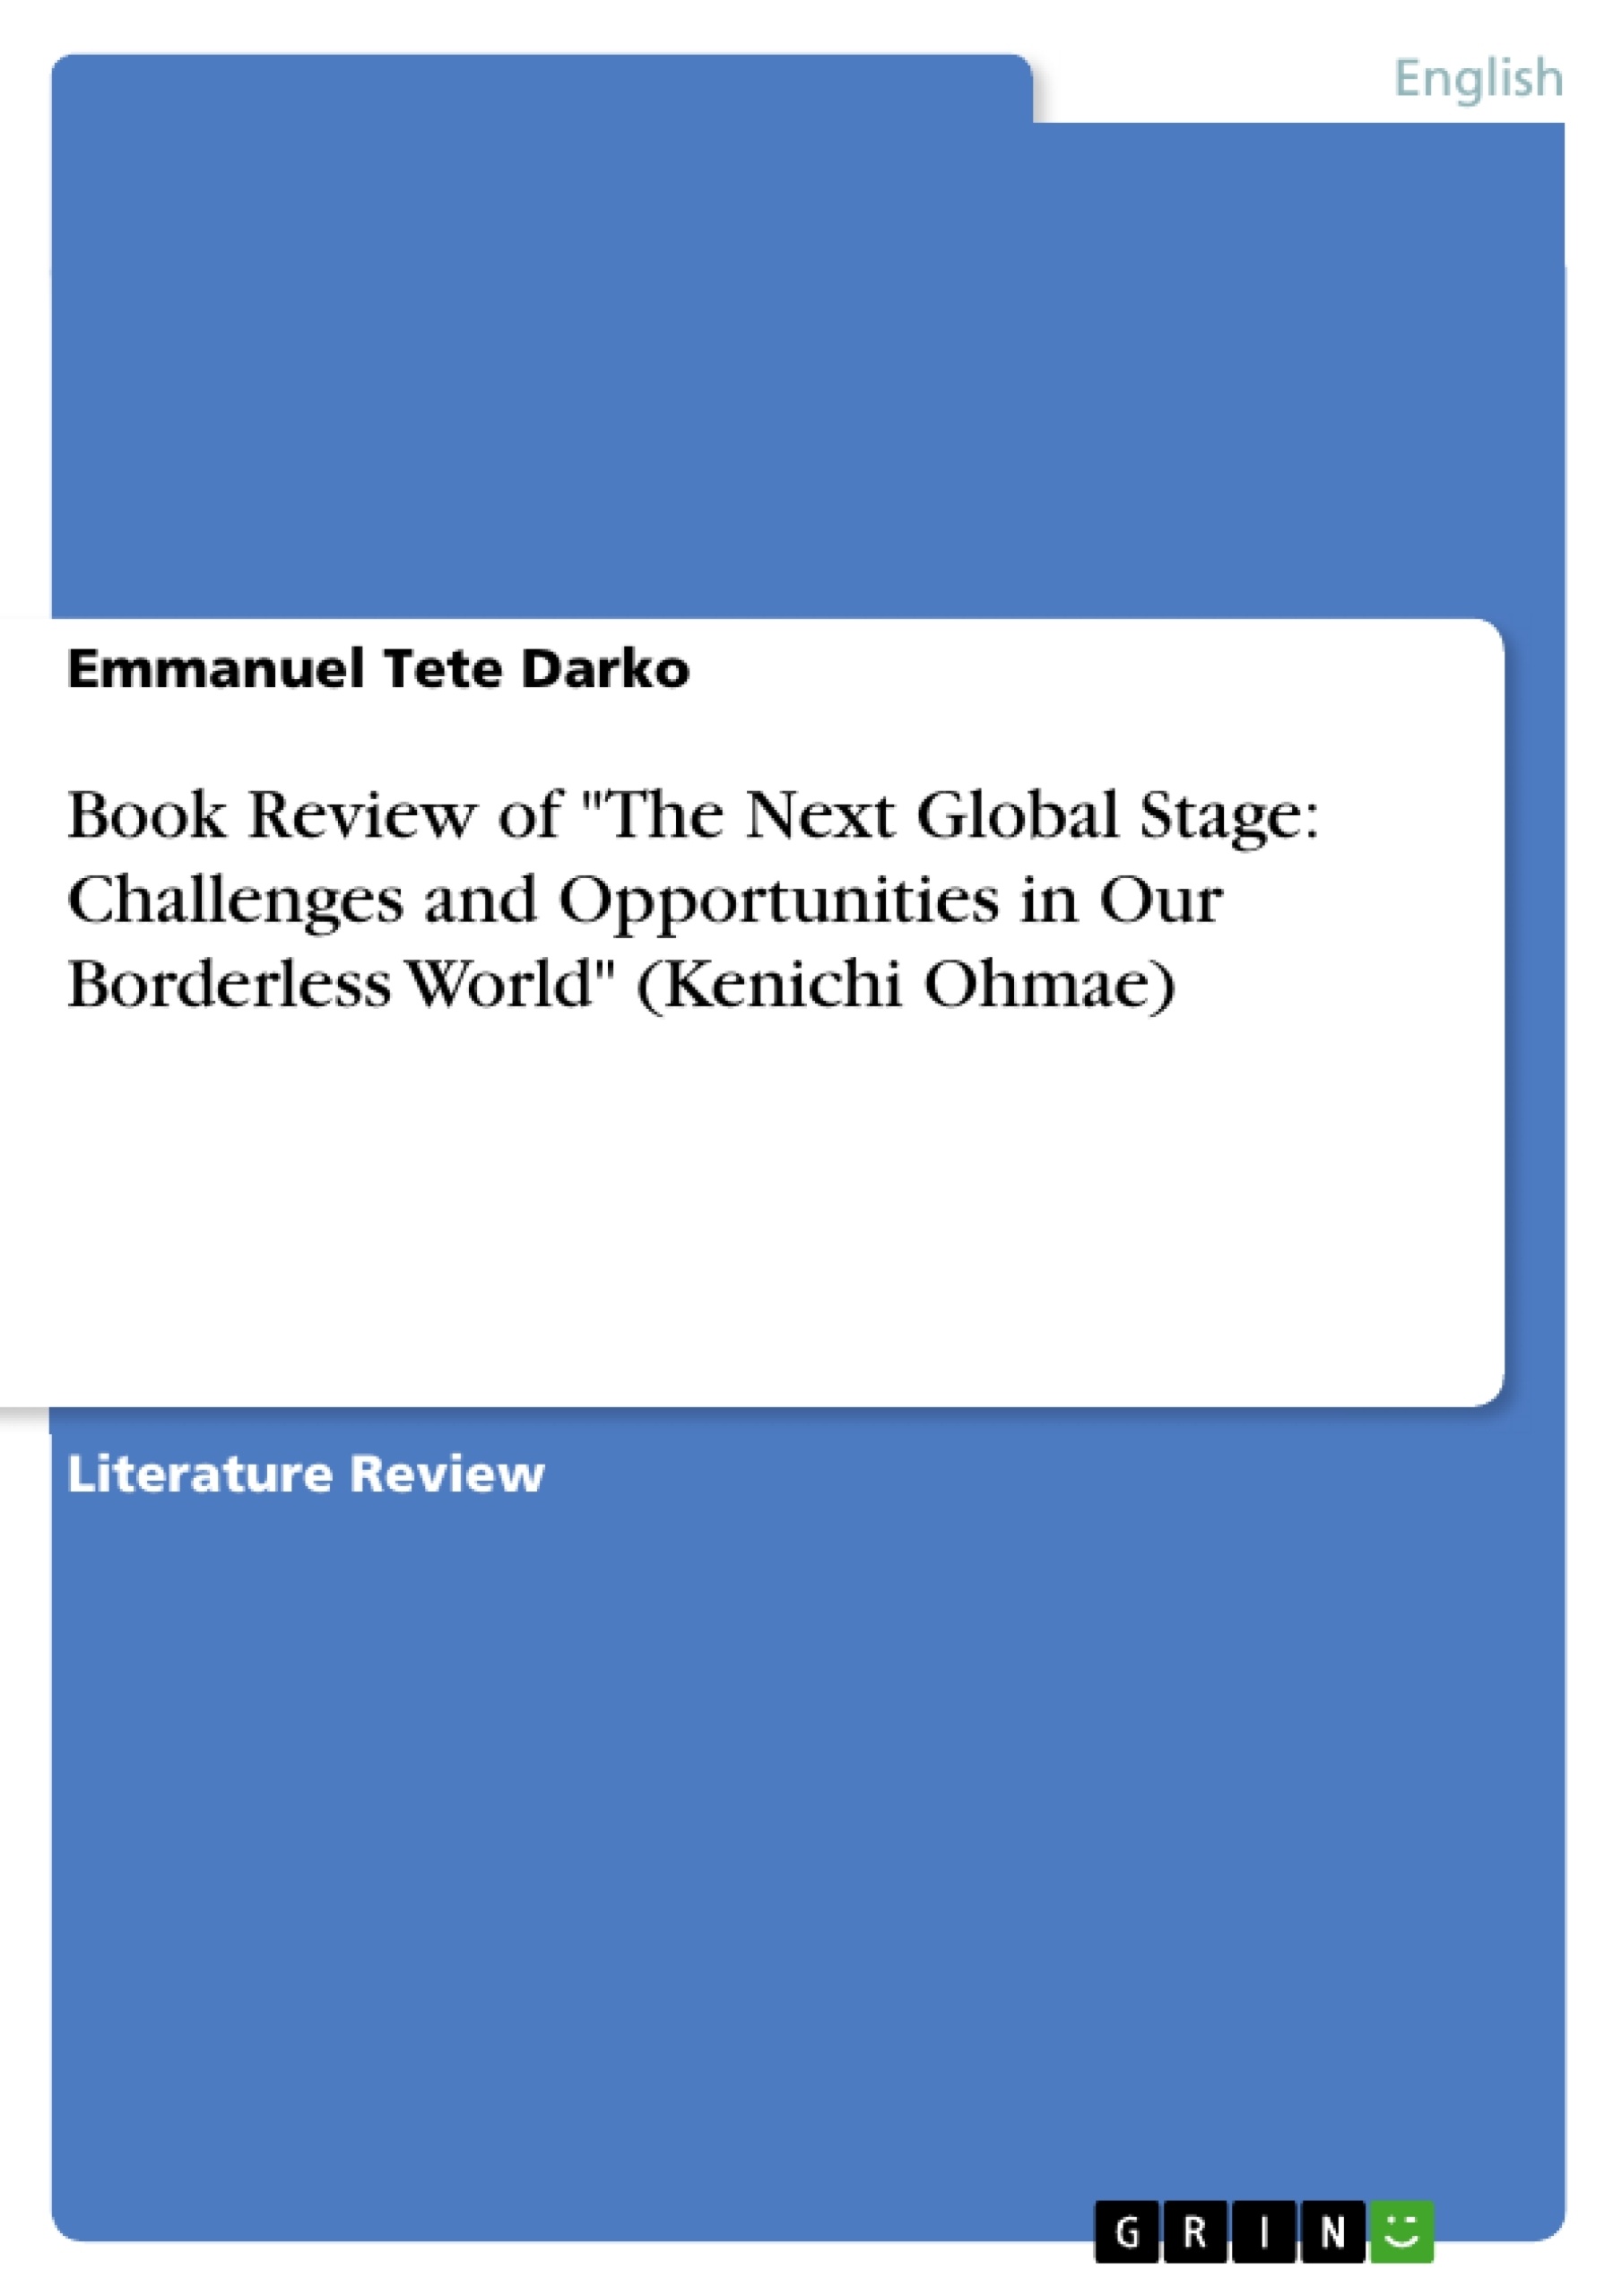 Título: Book Review of "The Next Global Stage: Challenges and Opportunities in Our Borderless World" (Kenichi Ohmae)